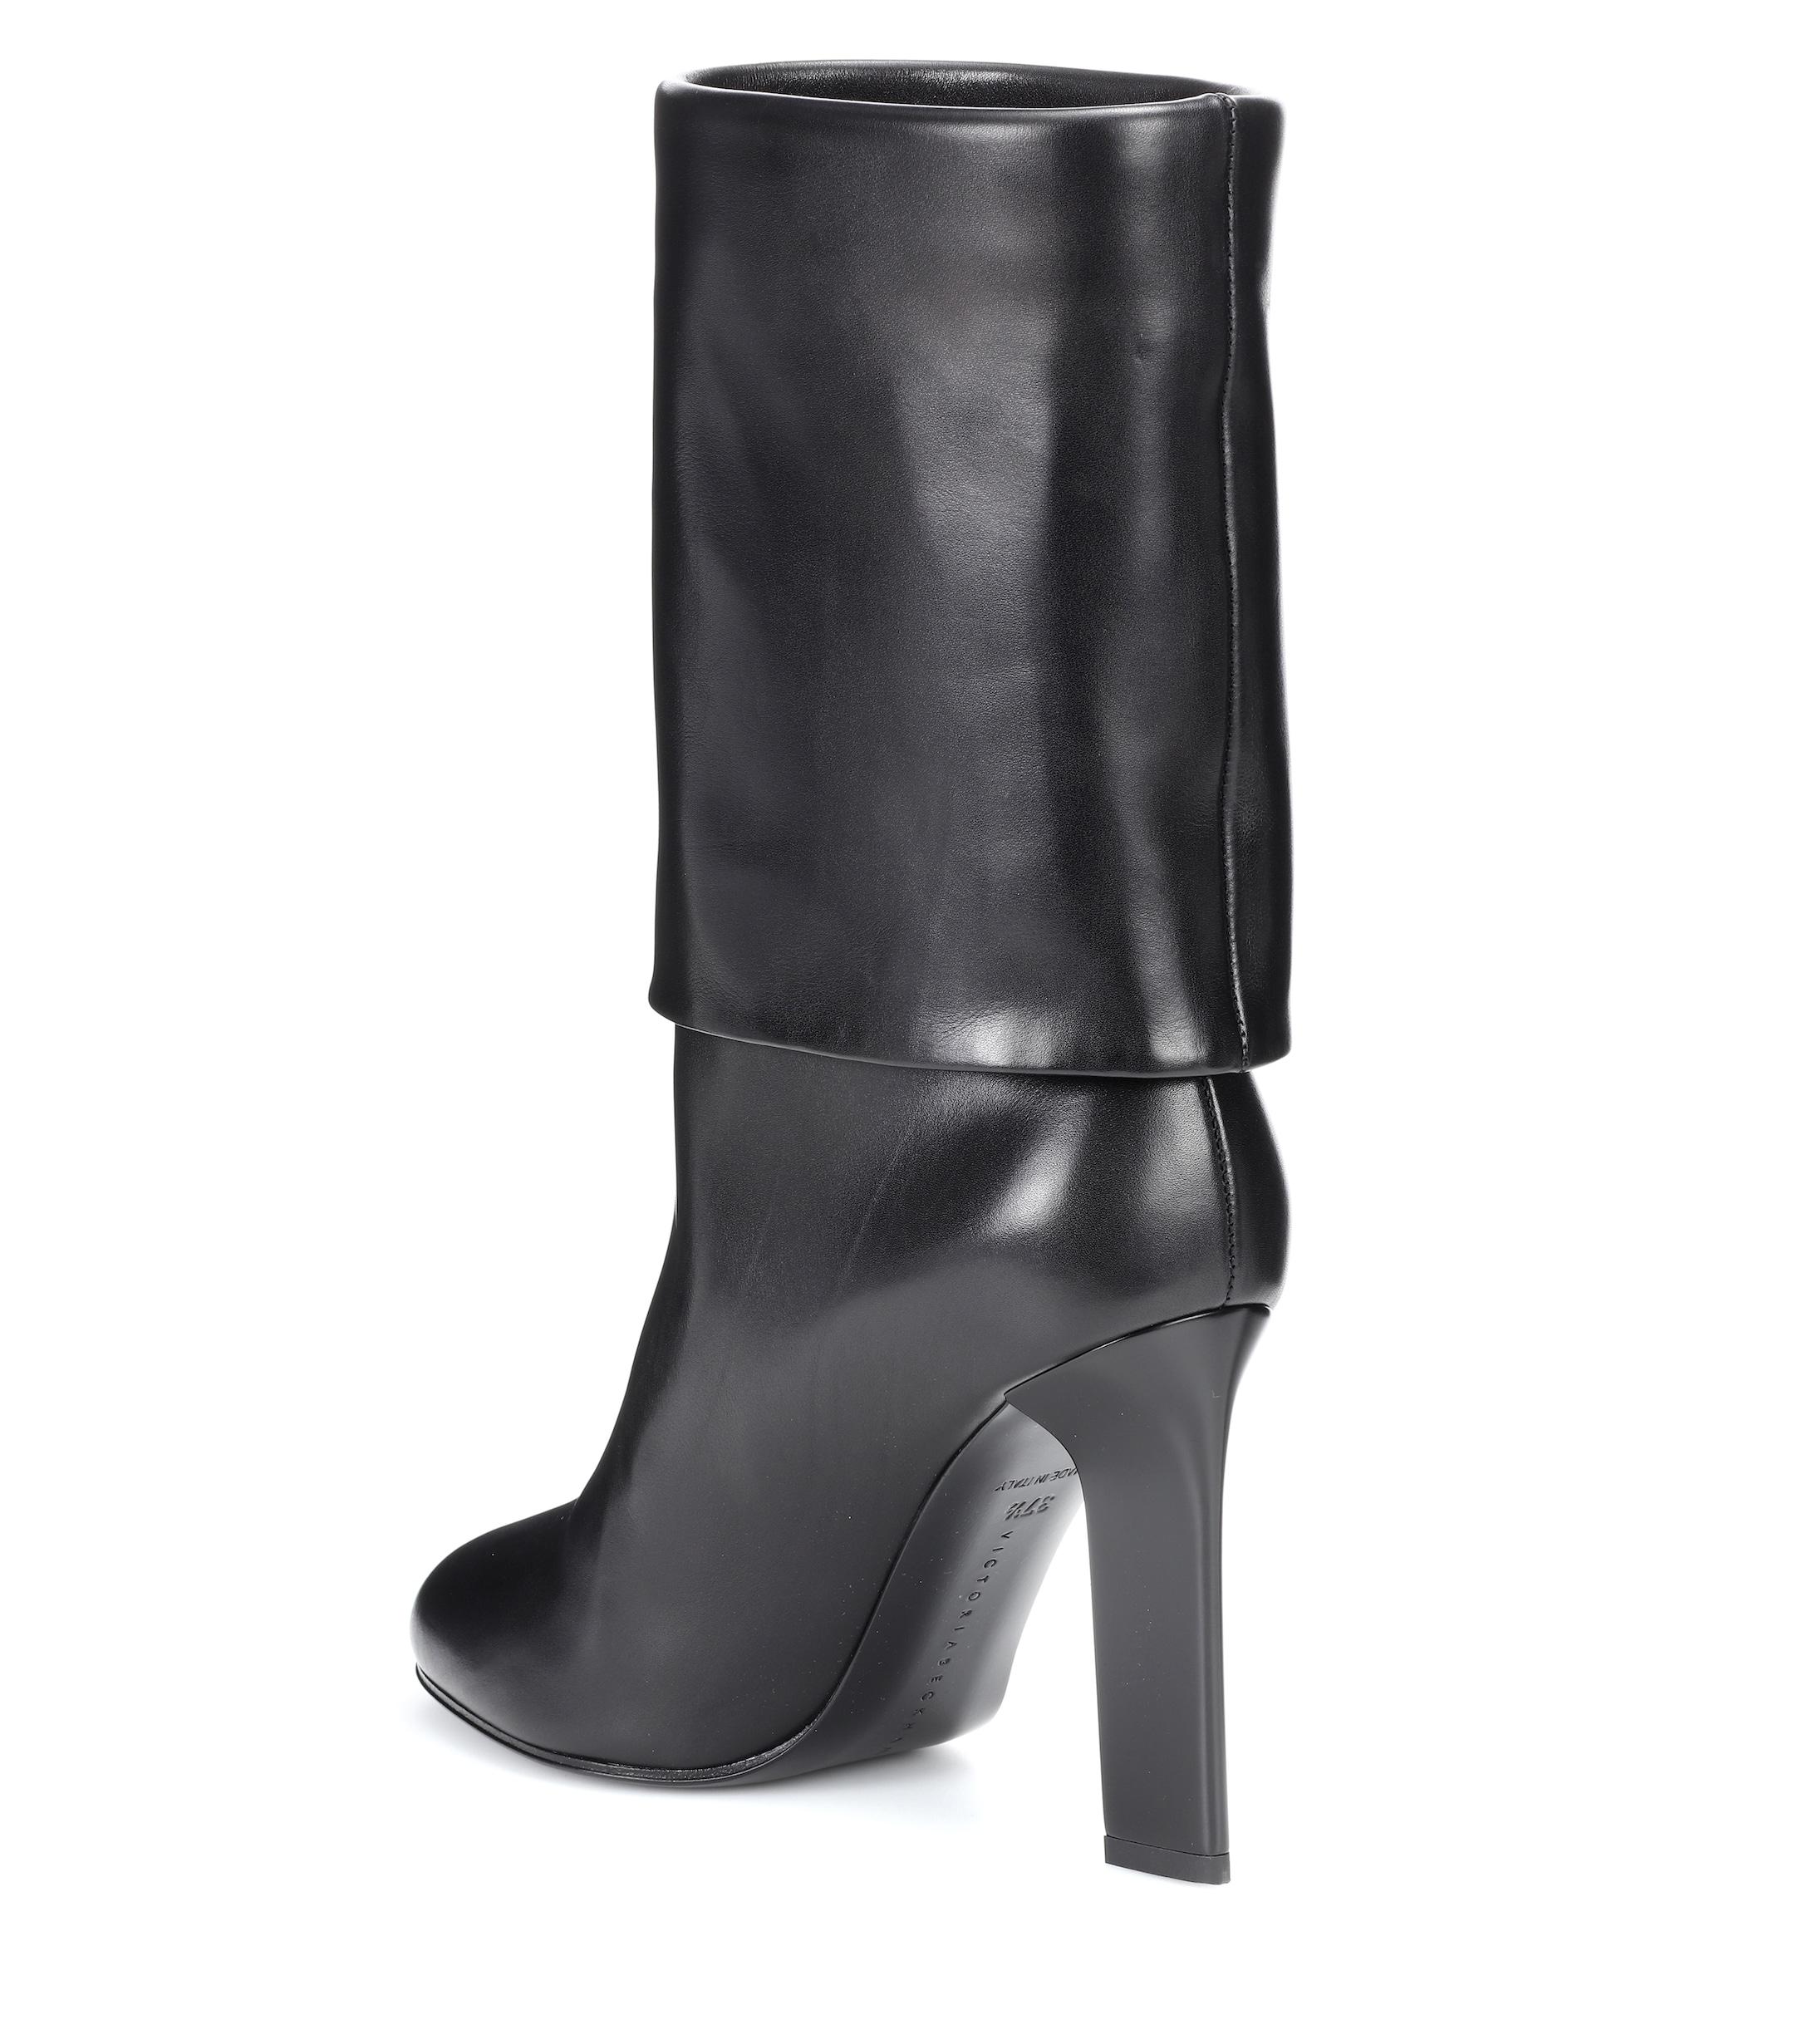 Victoria Beckham Leather Ankle Boots in Black - Lyst